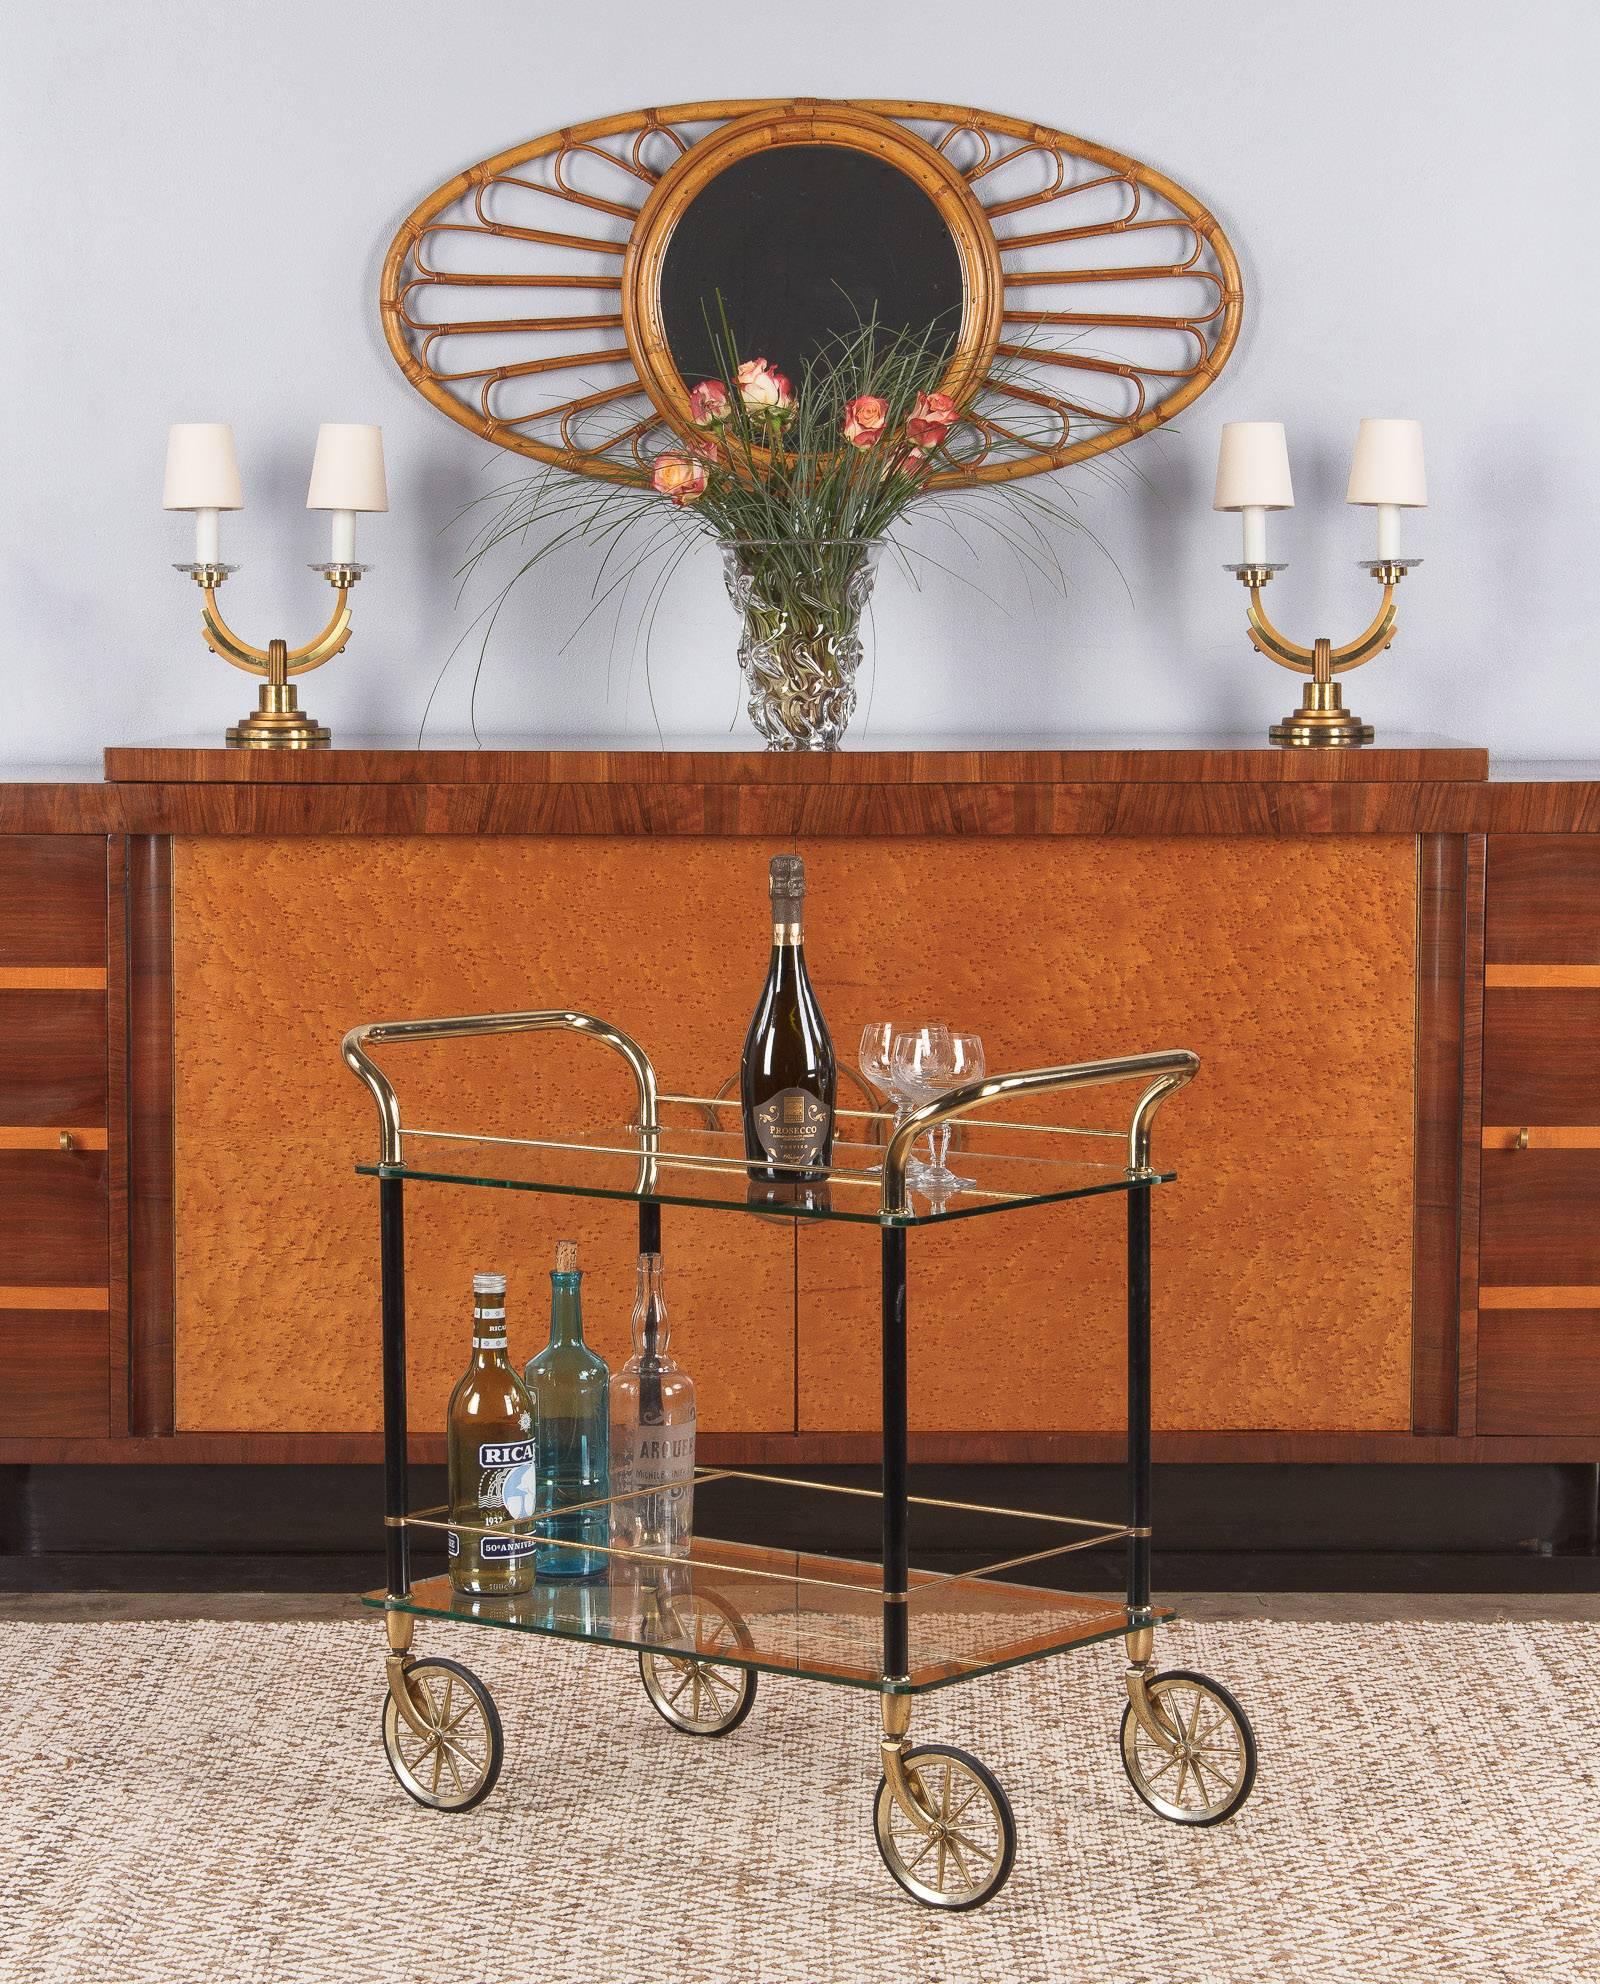 A great bar cart from Spain, circa 1980s. The vintage cart combines black metal legs with brass handles, rods and trim. Either side has a handle, instead of the typical one. Both shelves are clear glass with mirrored glass edges and trim. The bottom